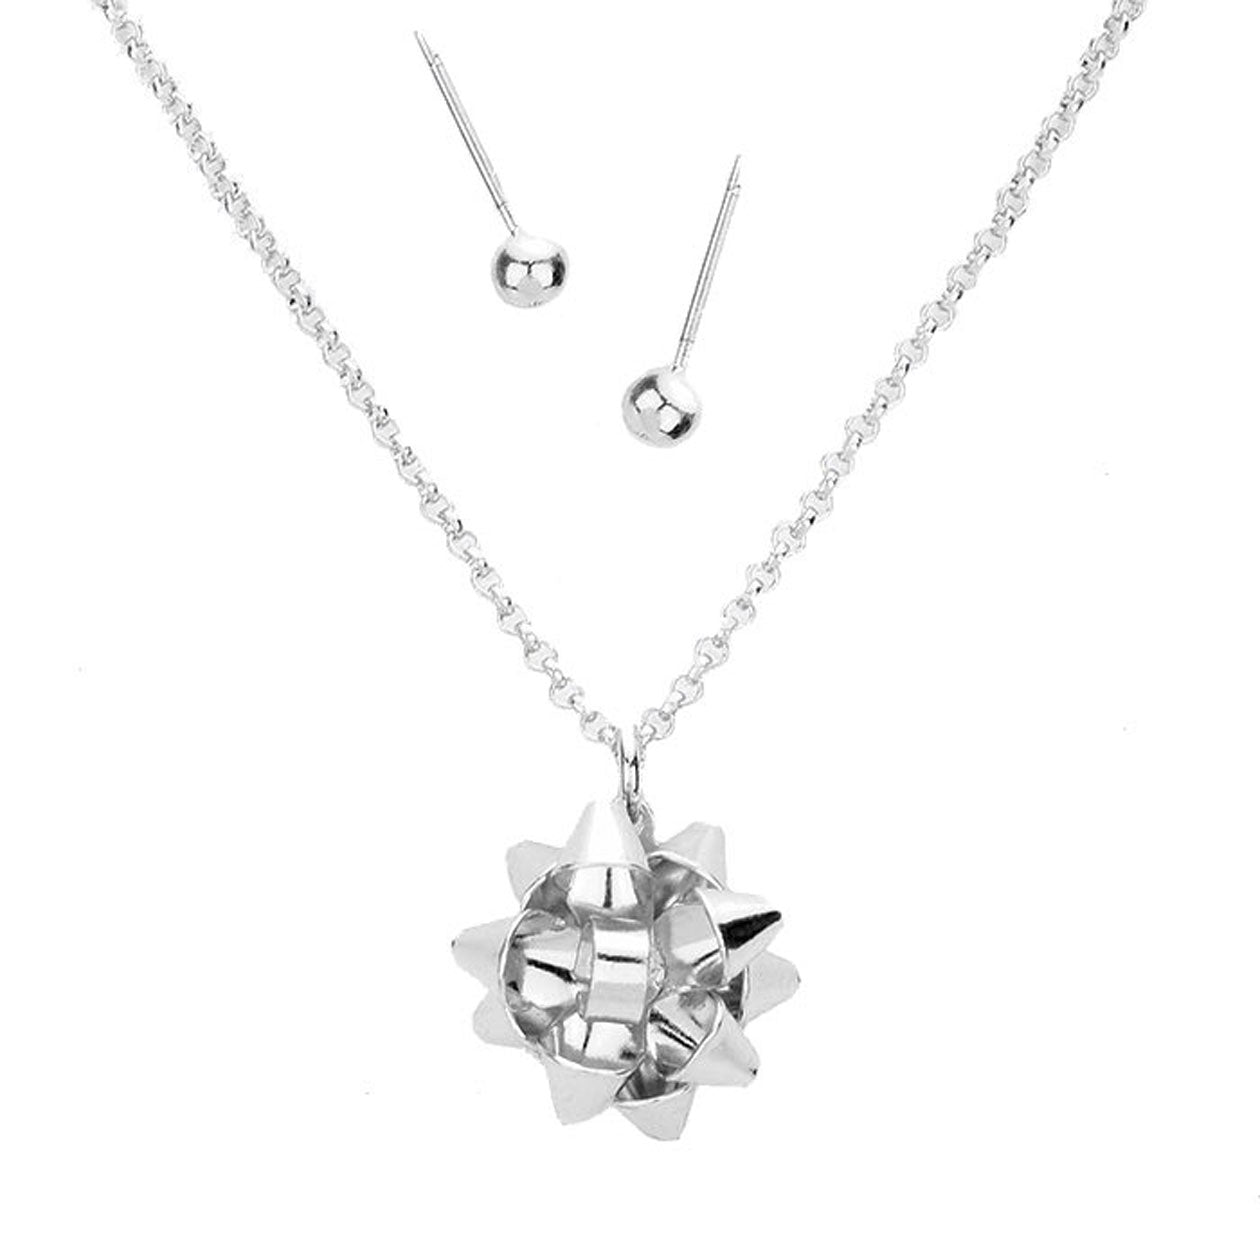 Rhodium Metal Christmas Gift Bow Pendant Necklace. Beautifully crafted design adds a gorgeous glow to any outfit. Jewelry that fits your lifestyle! Perfect Birthday Gift, Anniversary Gift, Mother's Day Gift, Anniversary Gift, Graduation Gift, Prom Jewelry, Just Because Gift, Thank you Gift.